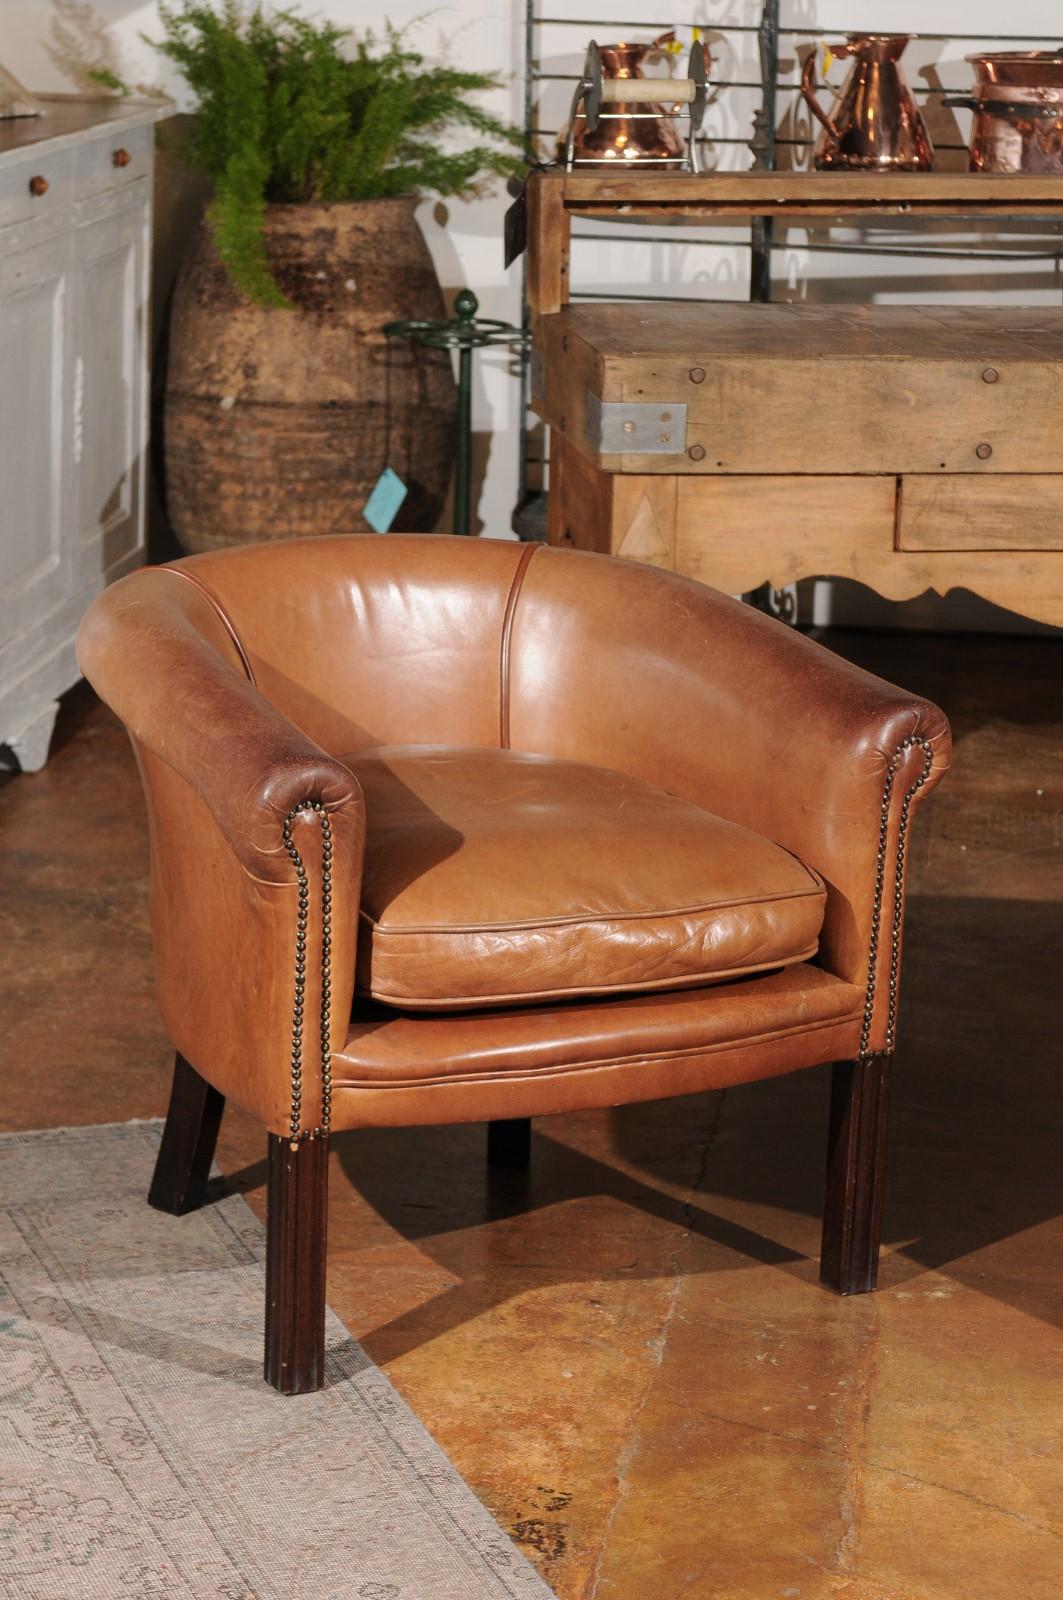 Pair of Italian Vintage Caramel Leather Club Chairs with Cushion and Nailheads 1